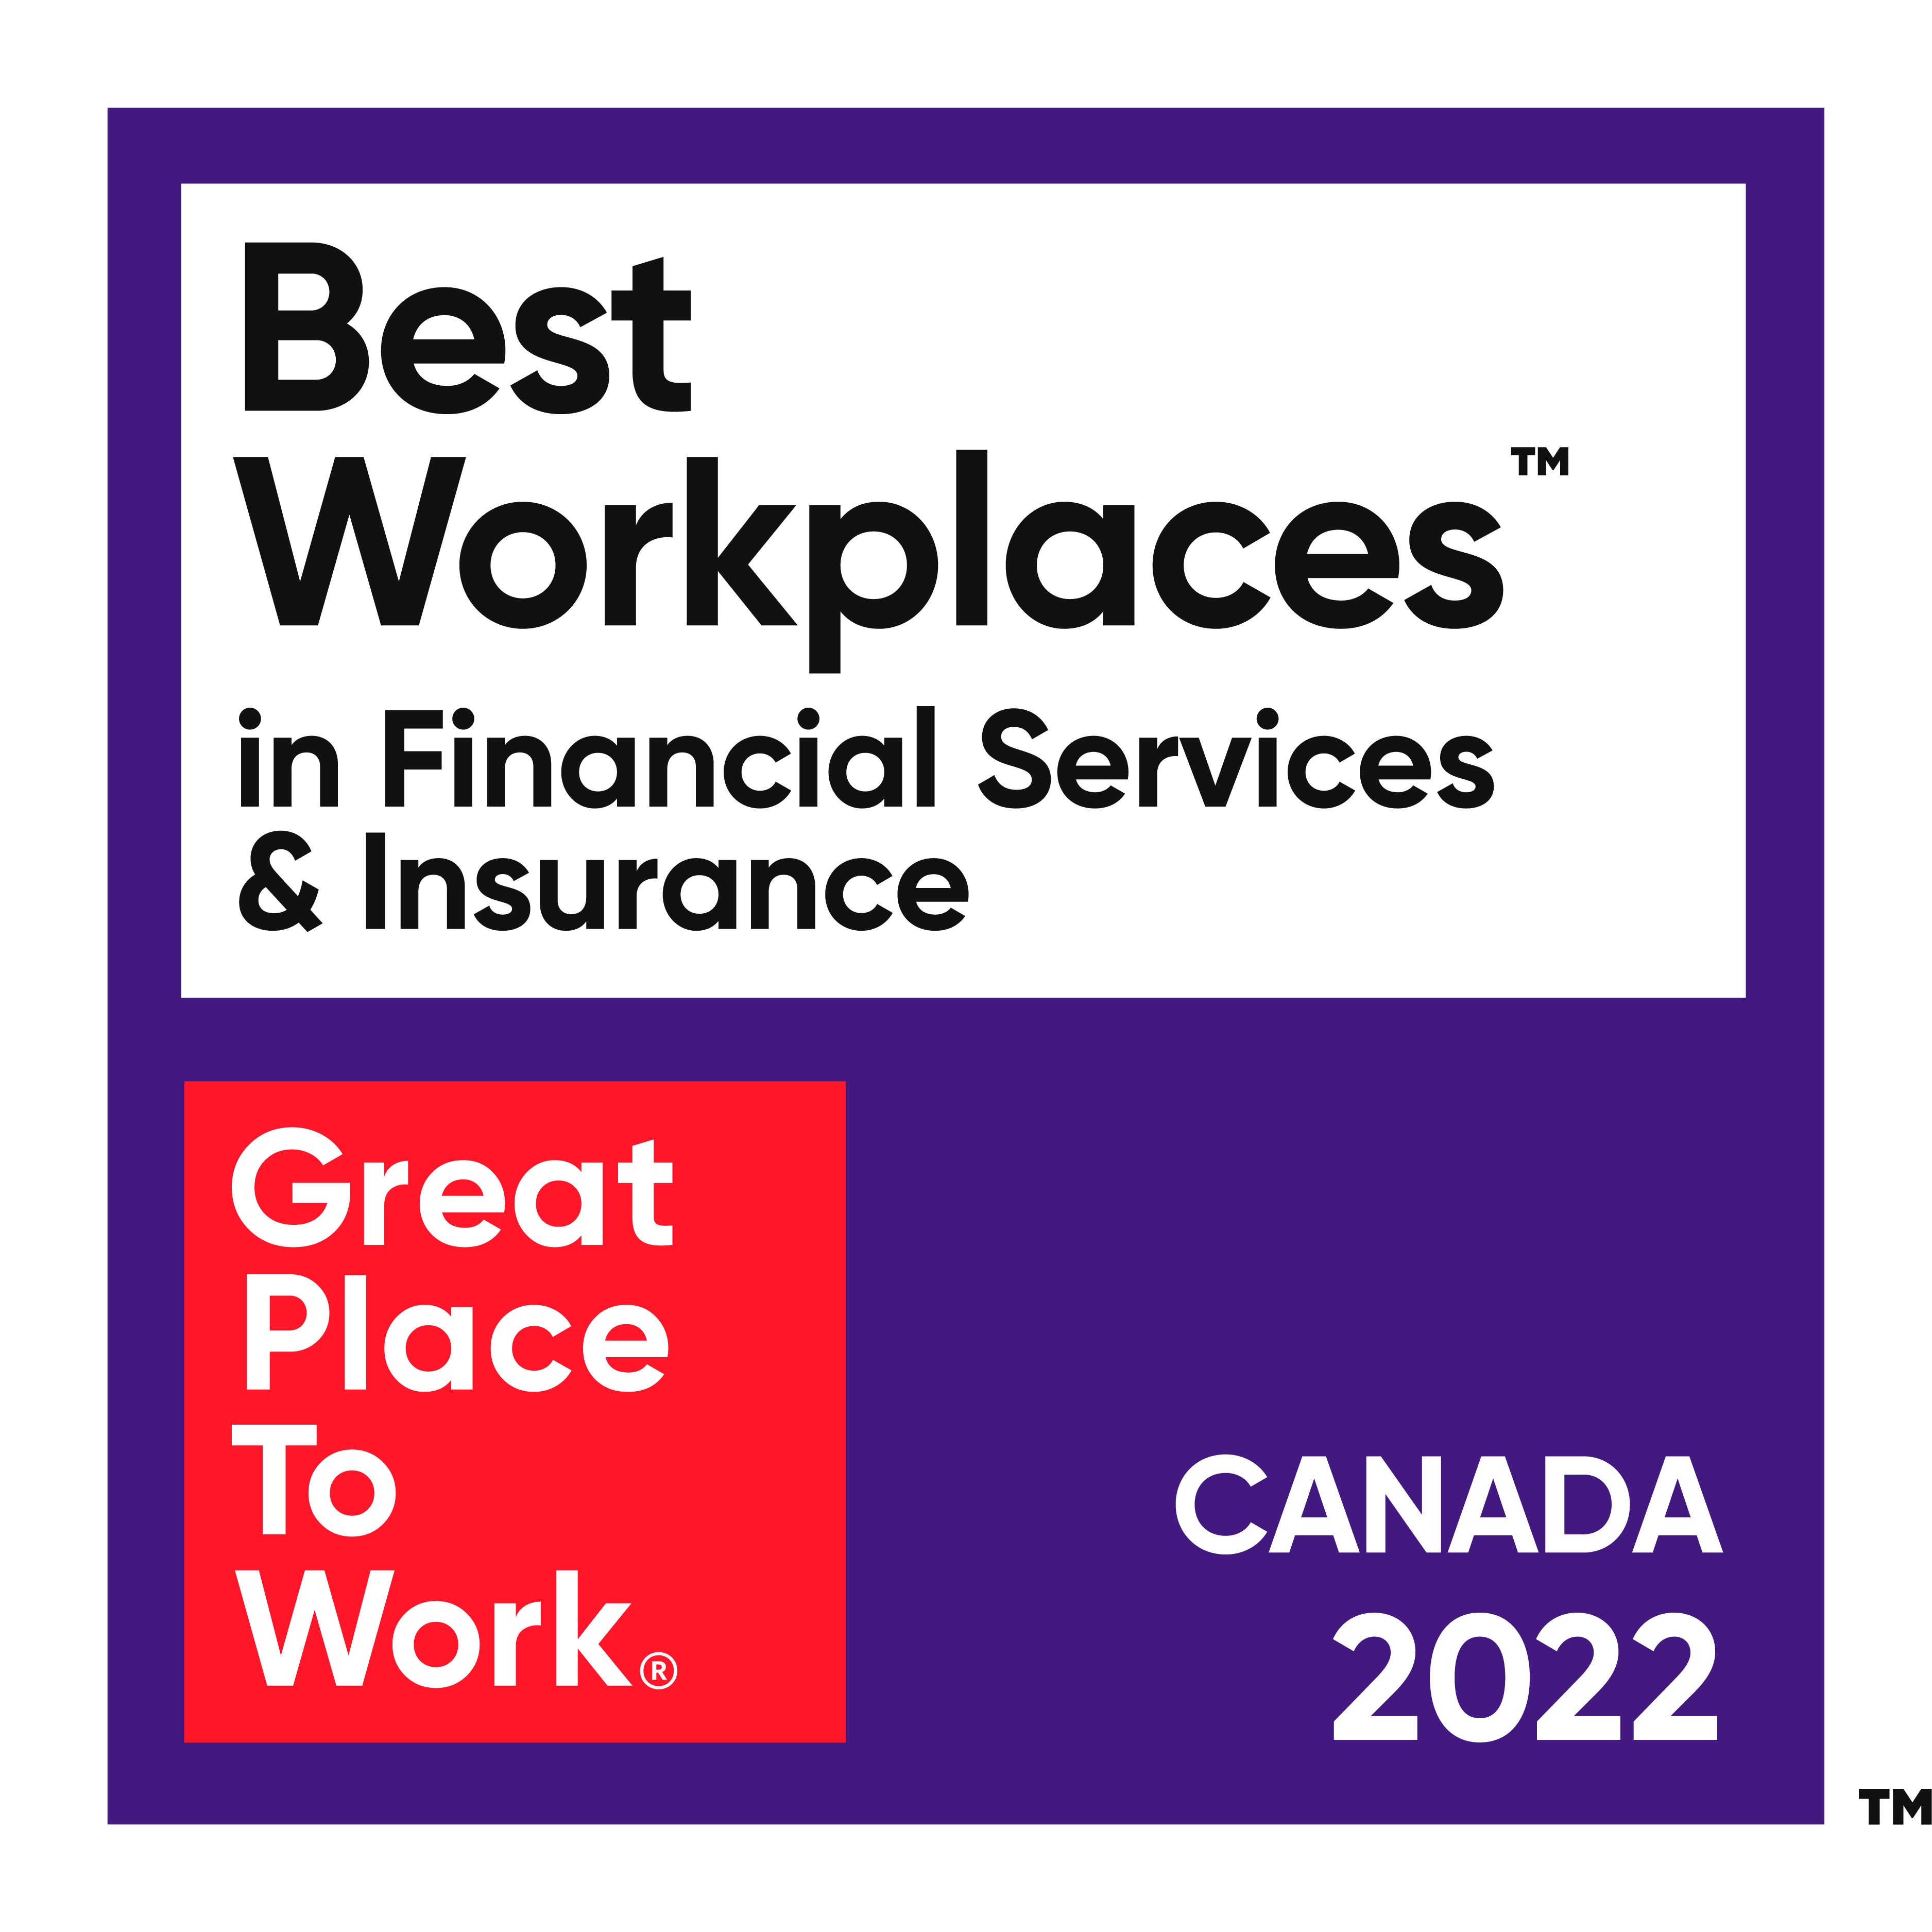 Best Workplaces in Financial Servieces & Insurance Canada 2022